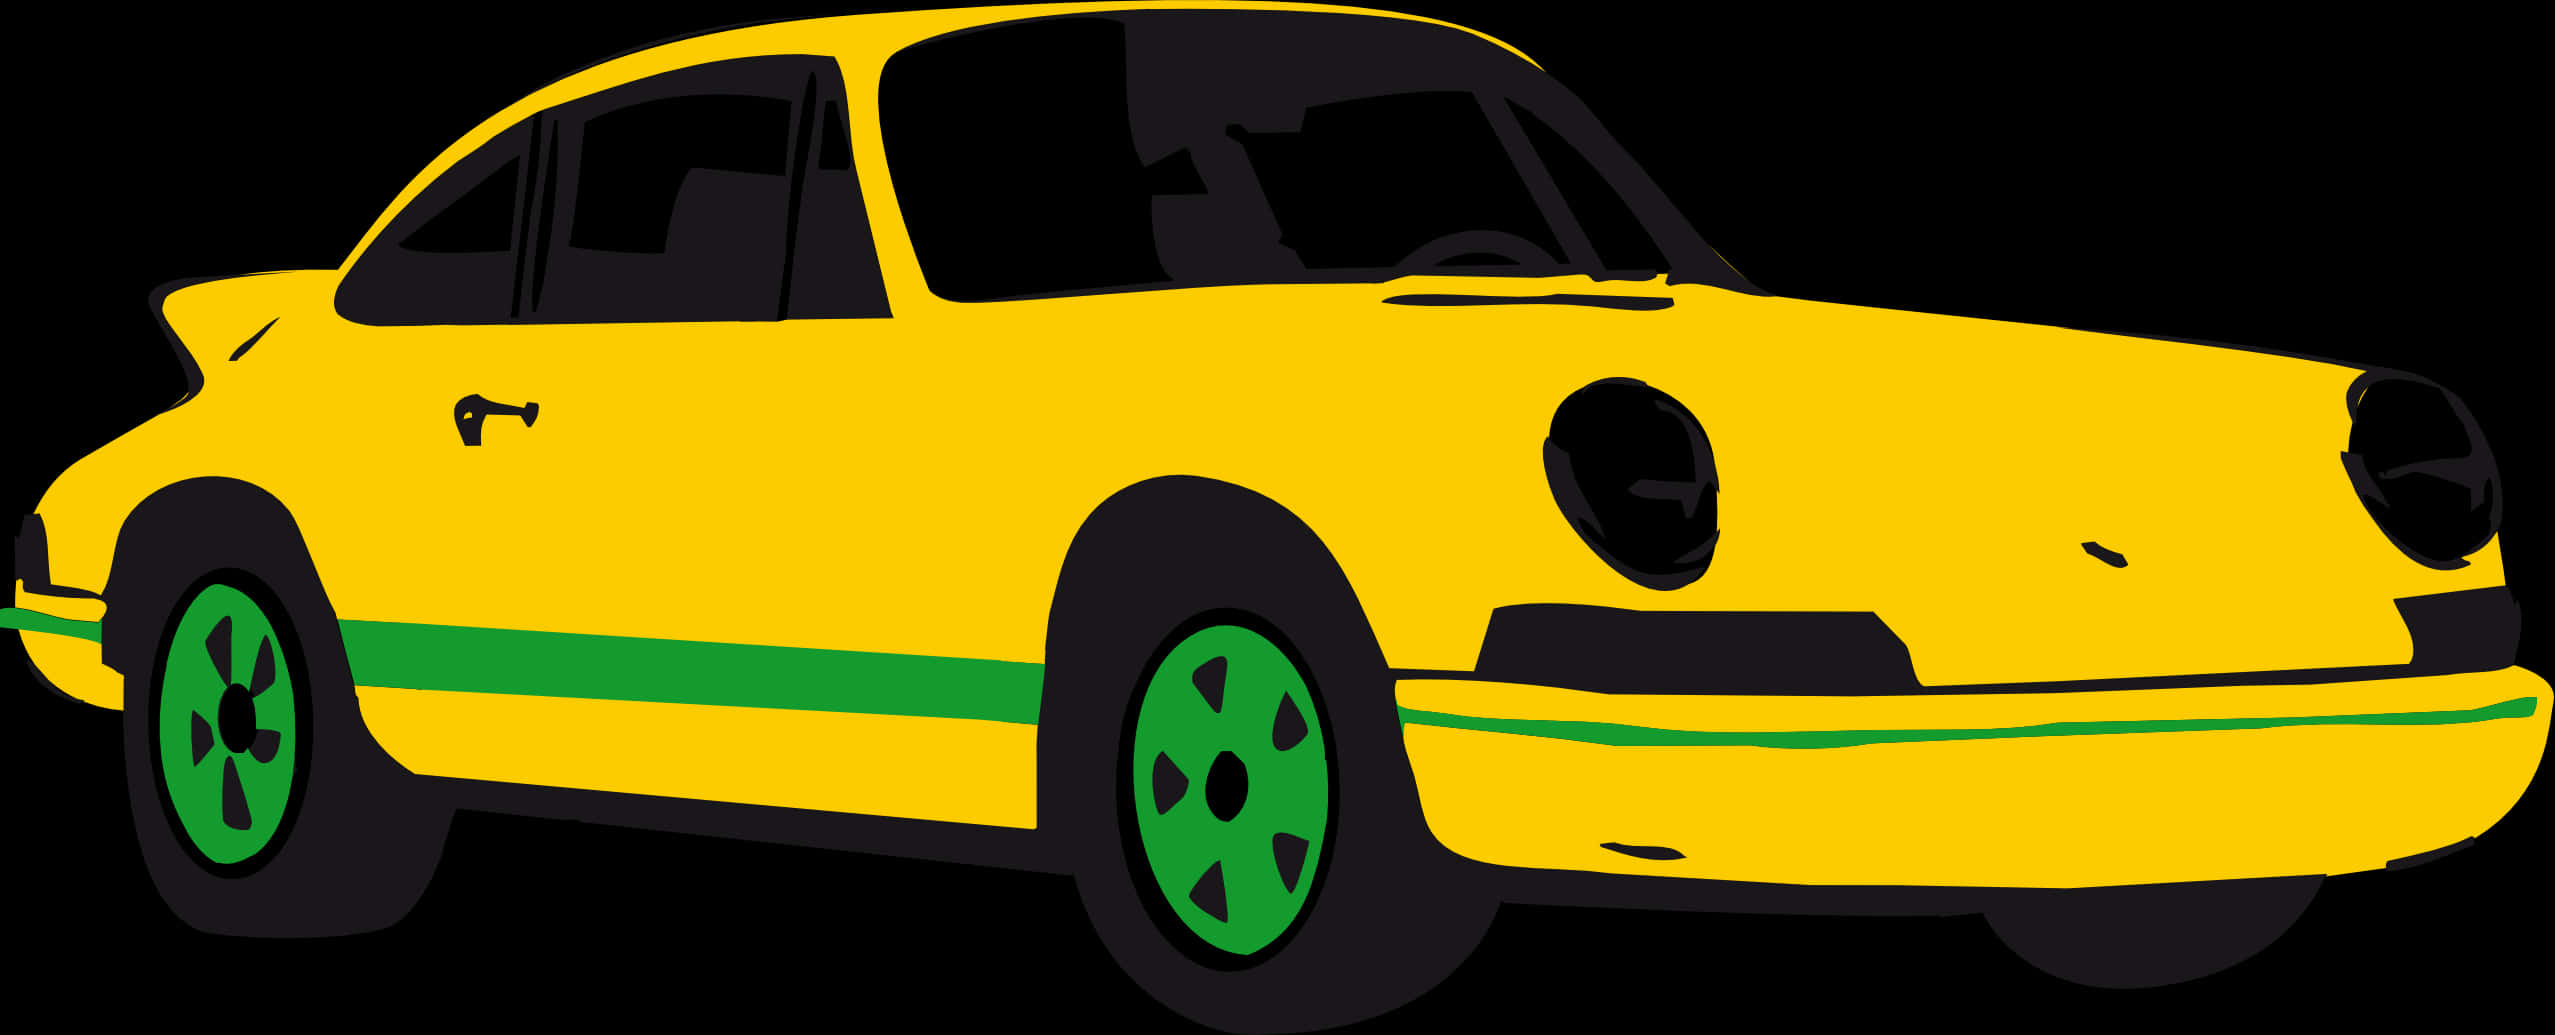 A Yellow Car With Green Rims